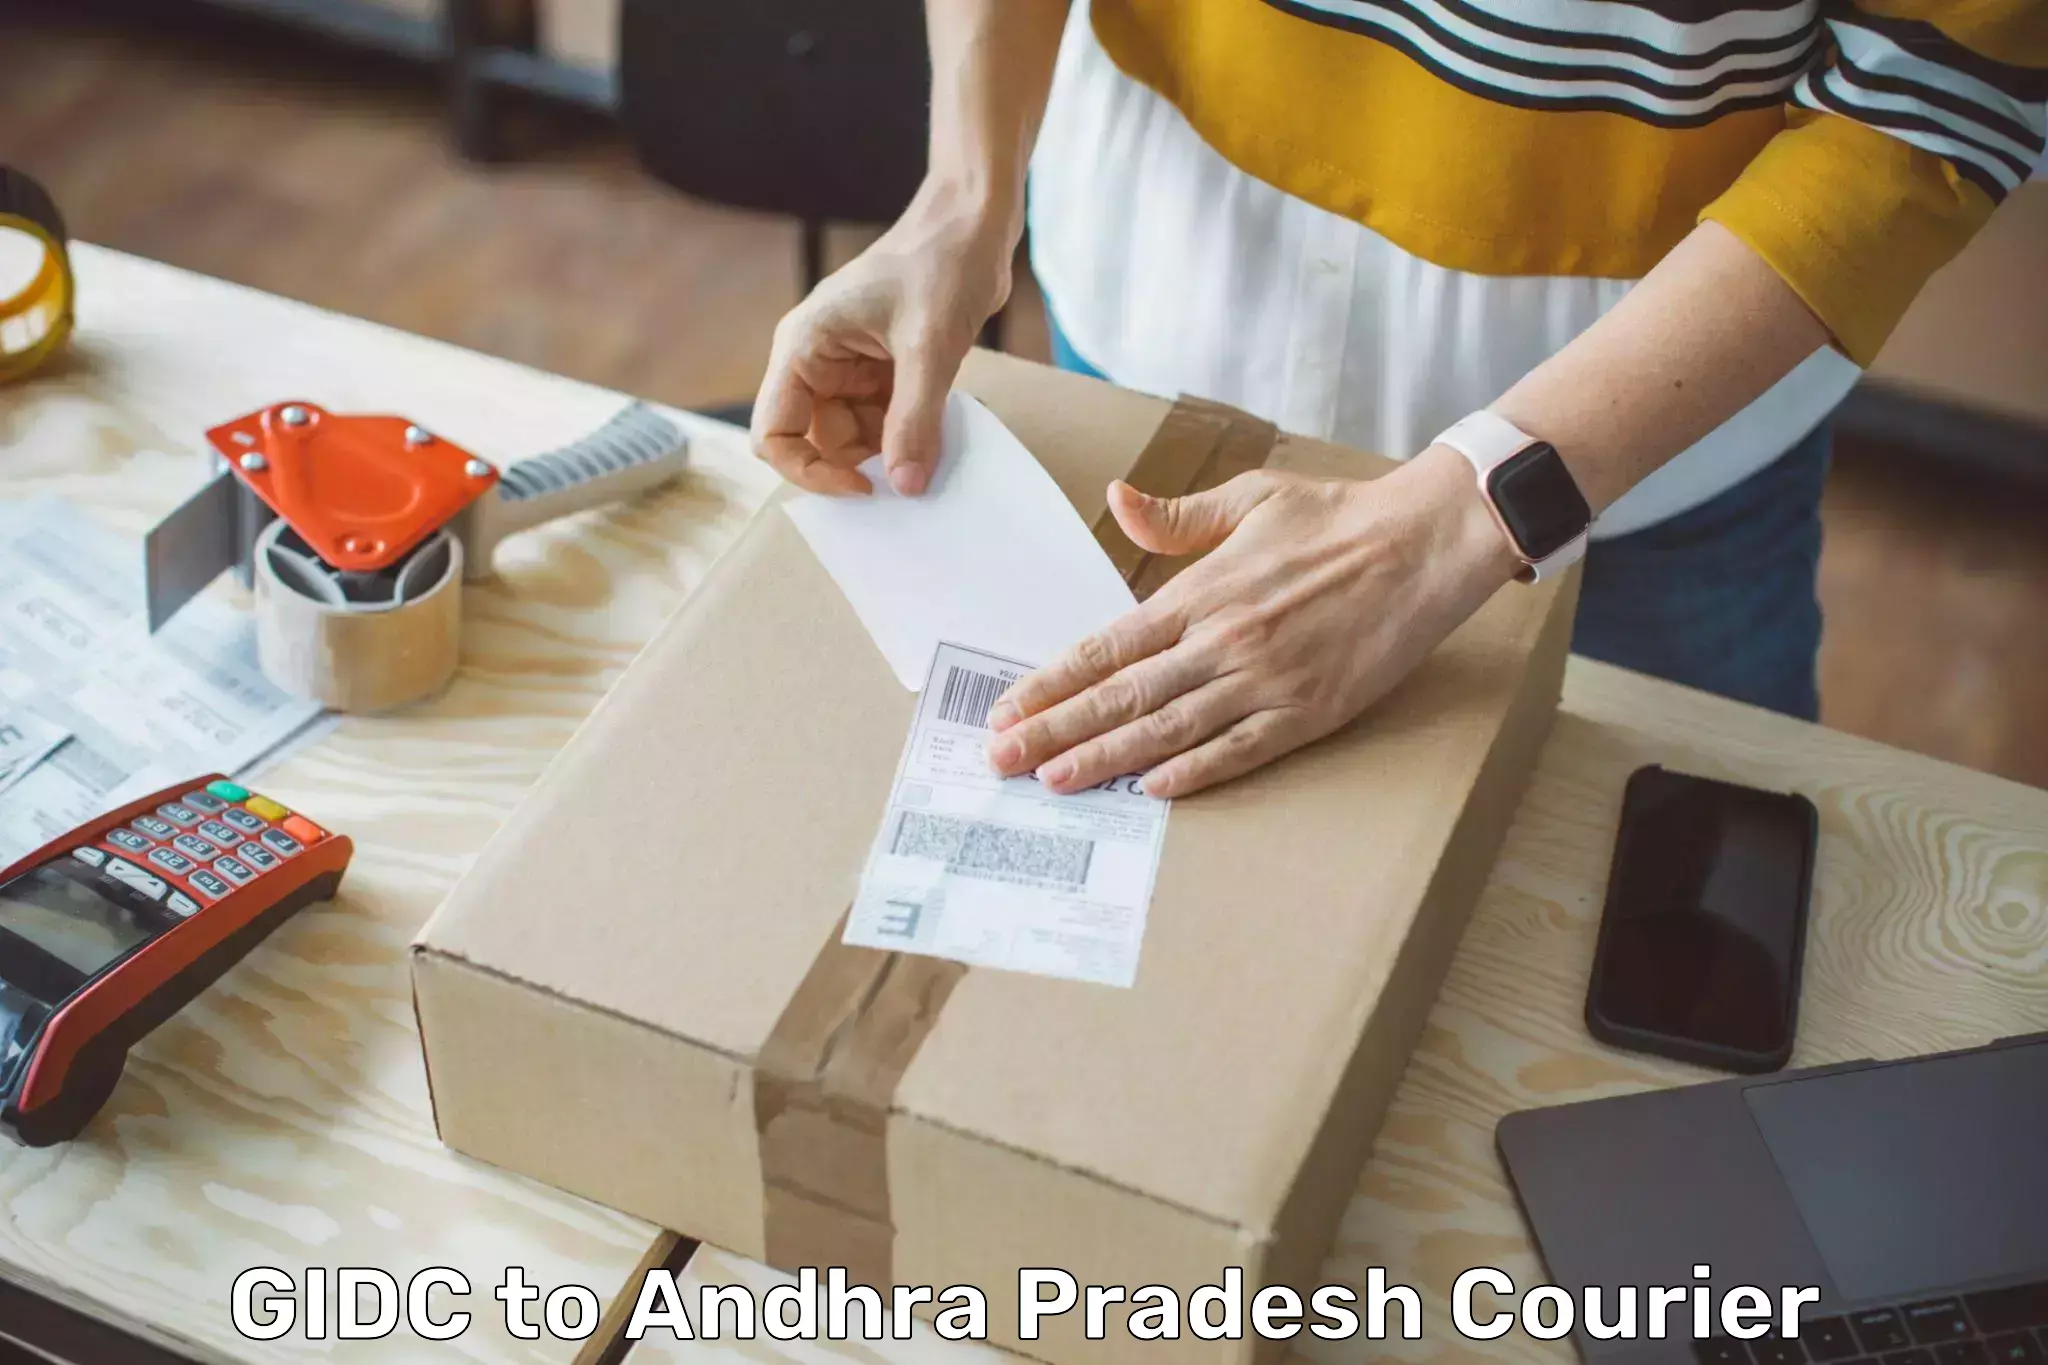 Full-service courier options GIDC to Andhra Pradesh